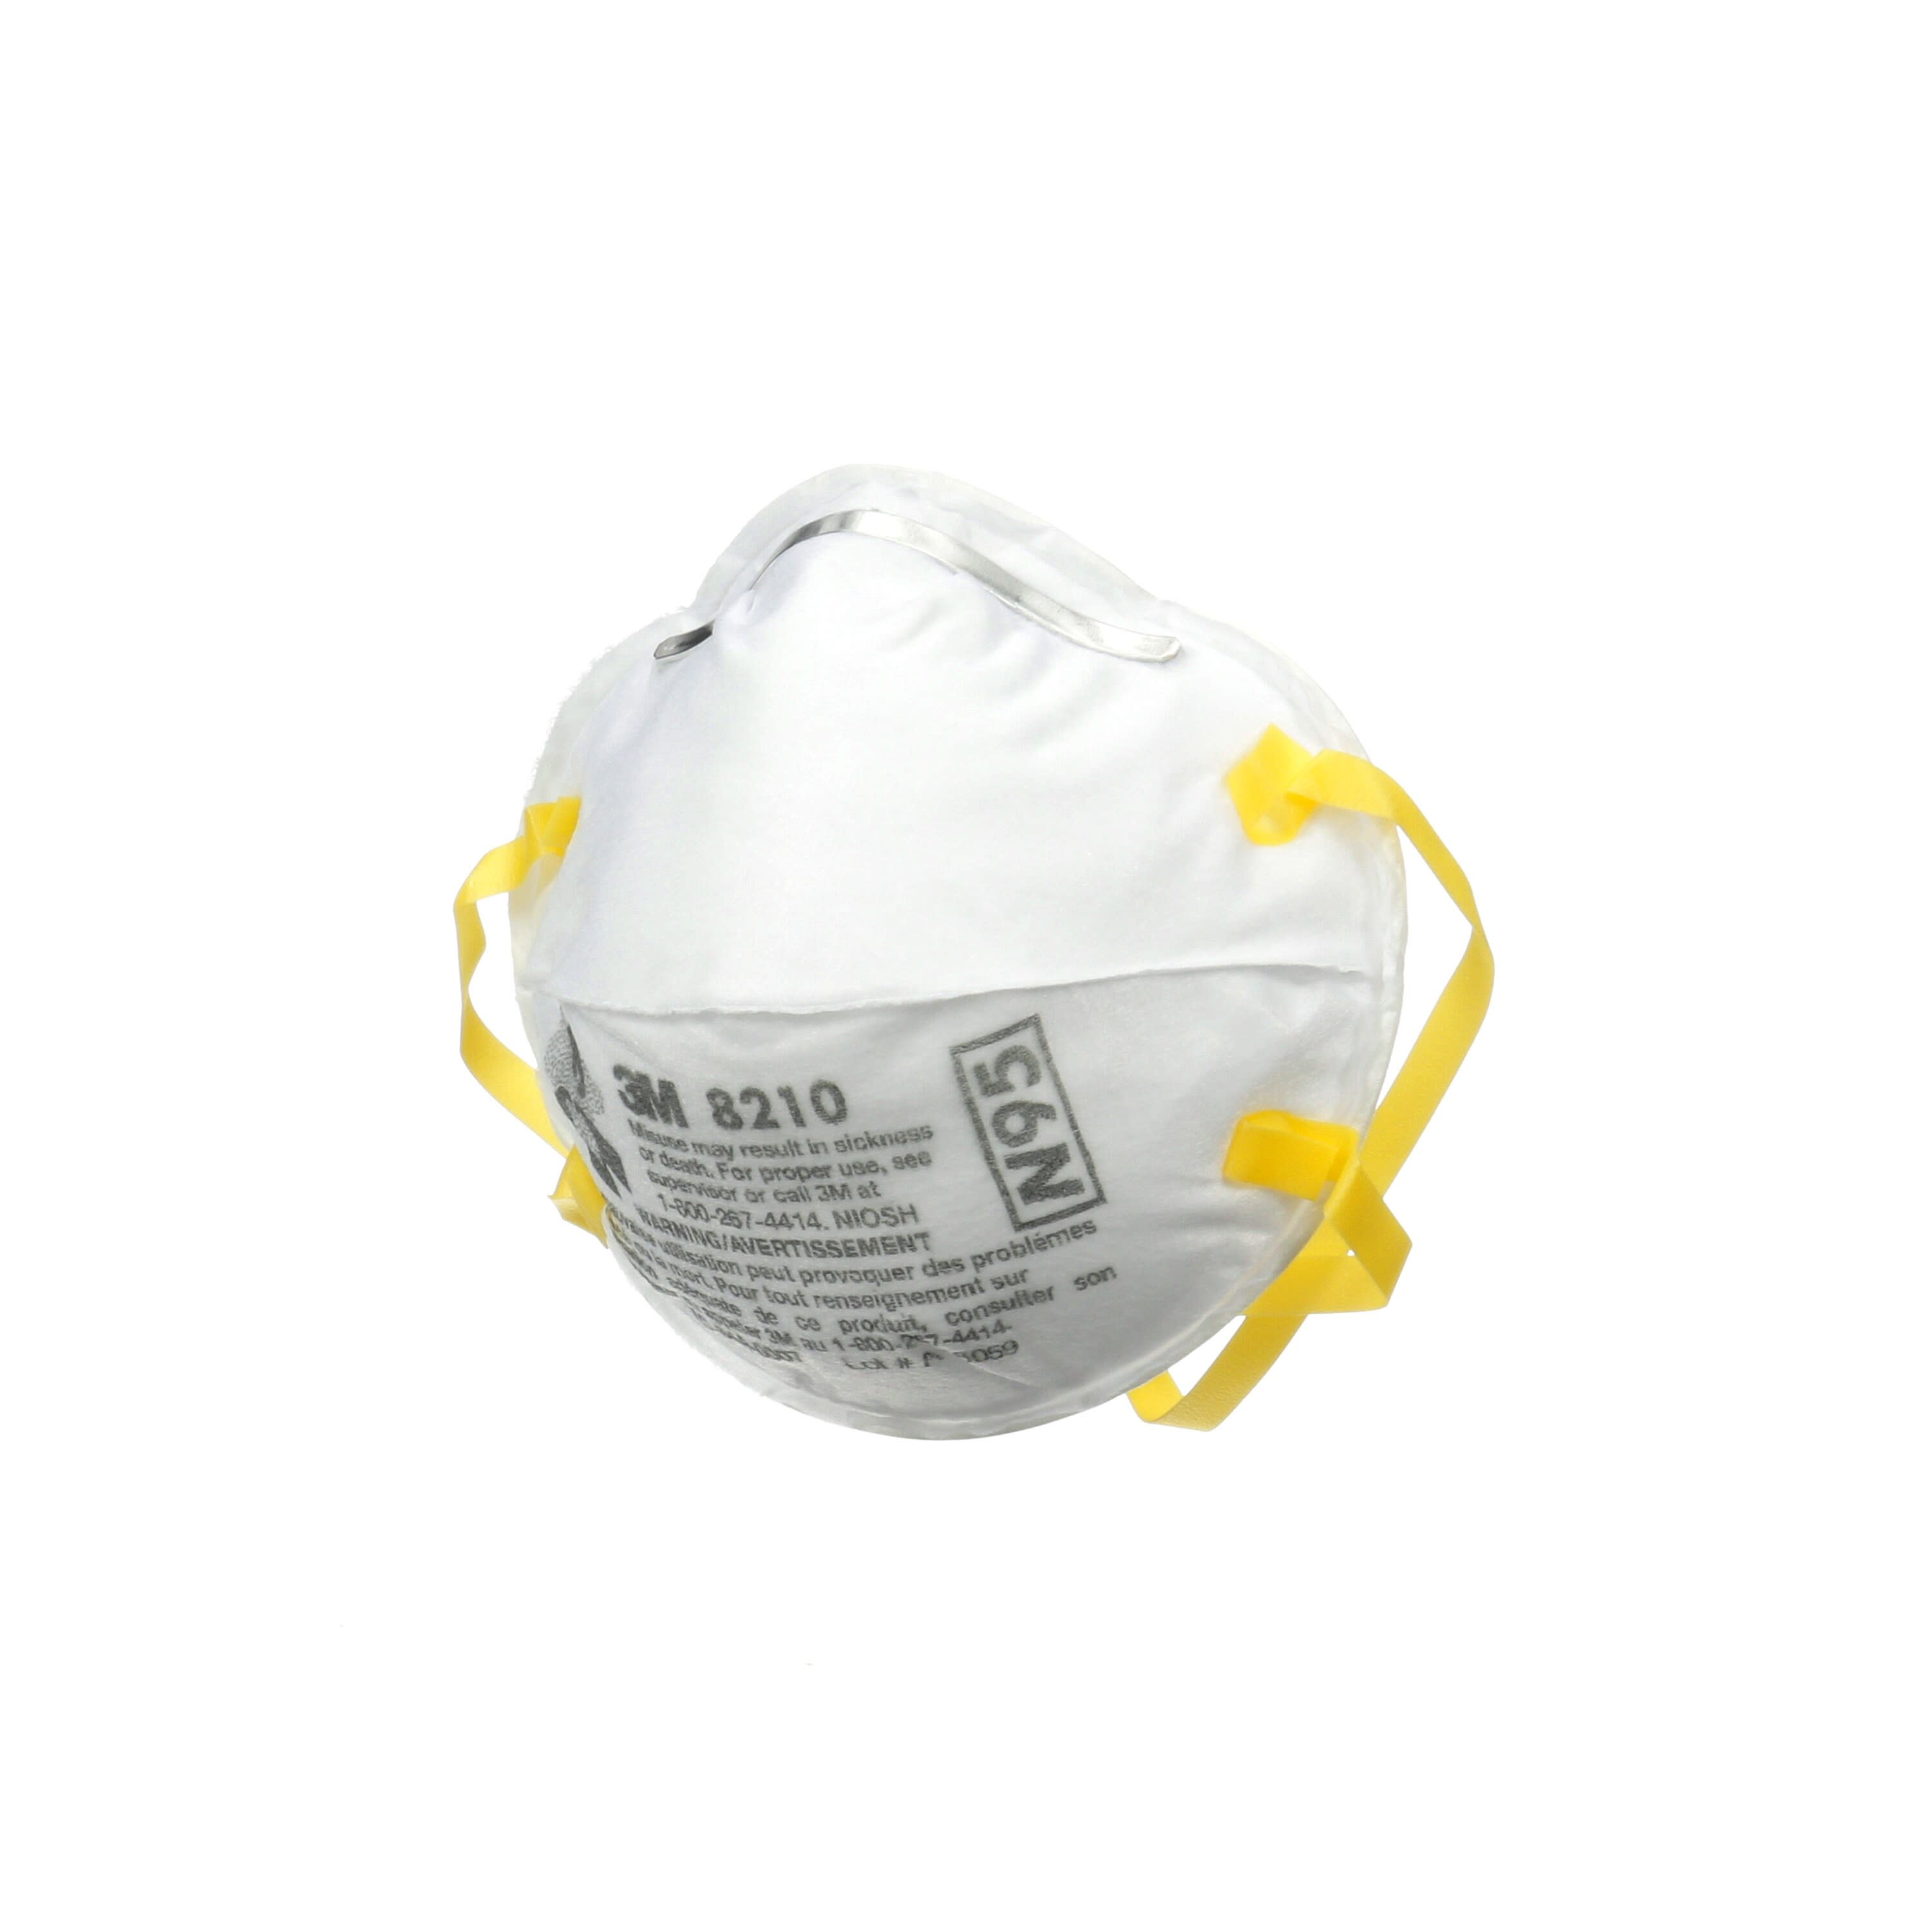 Master & Frank N95 Particulate Respirator